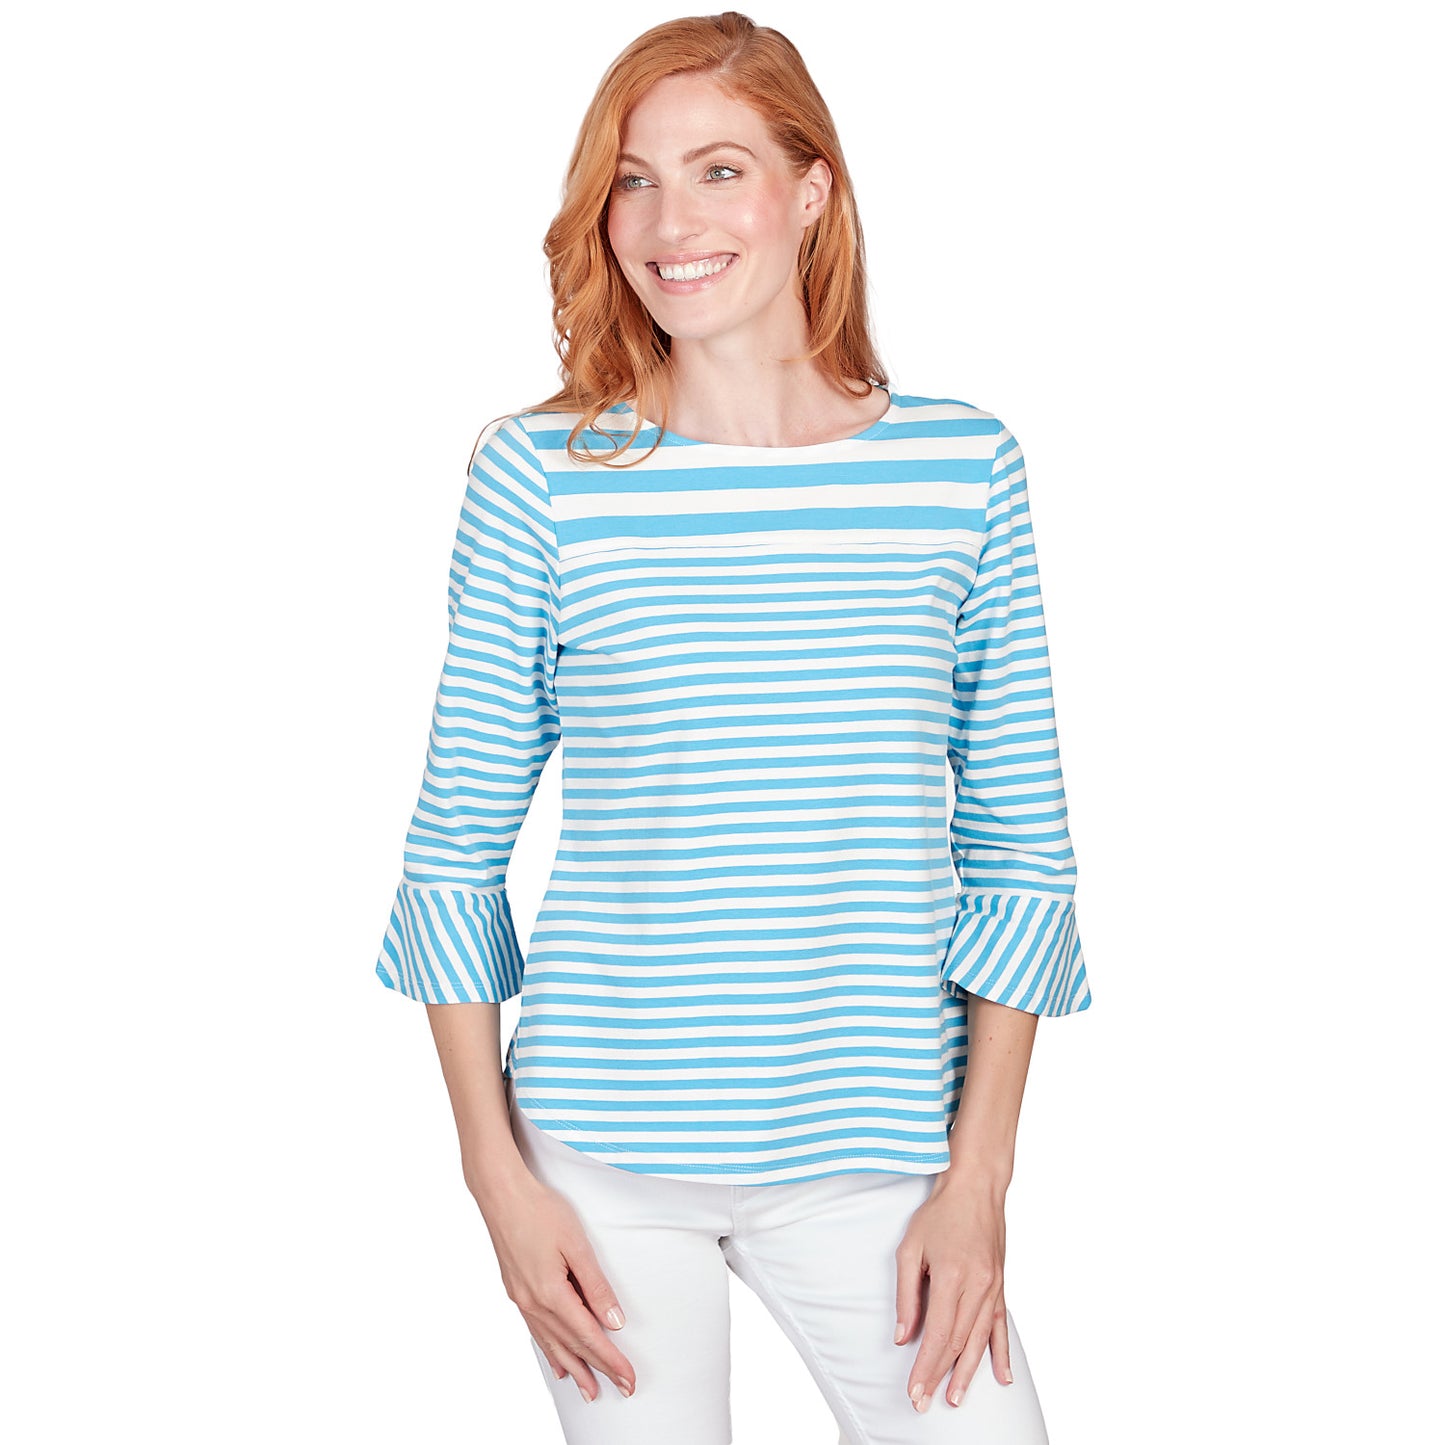 Women's Patio Party Striped Jersey Top